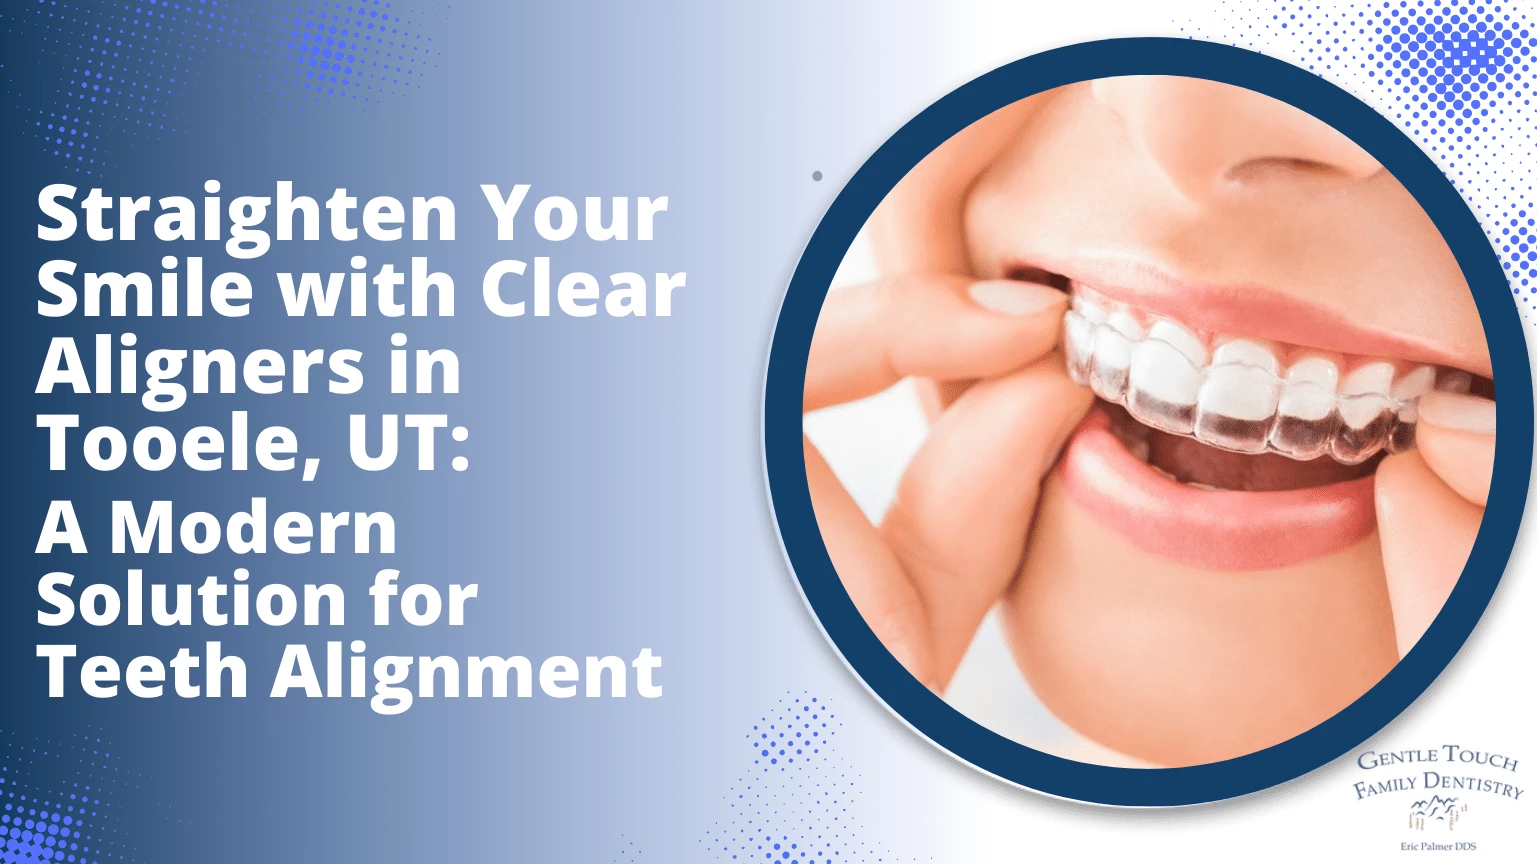 Straighten Your Smile with Clear Aligners in Tooele, UT A Modern Solution for Teeth Alignment